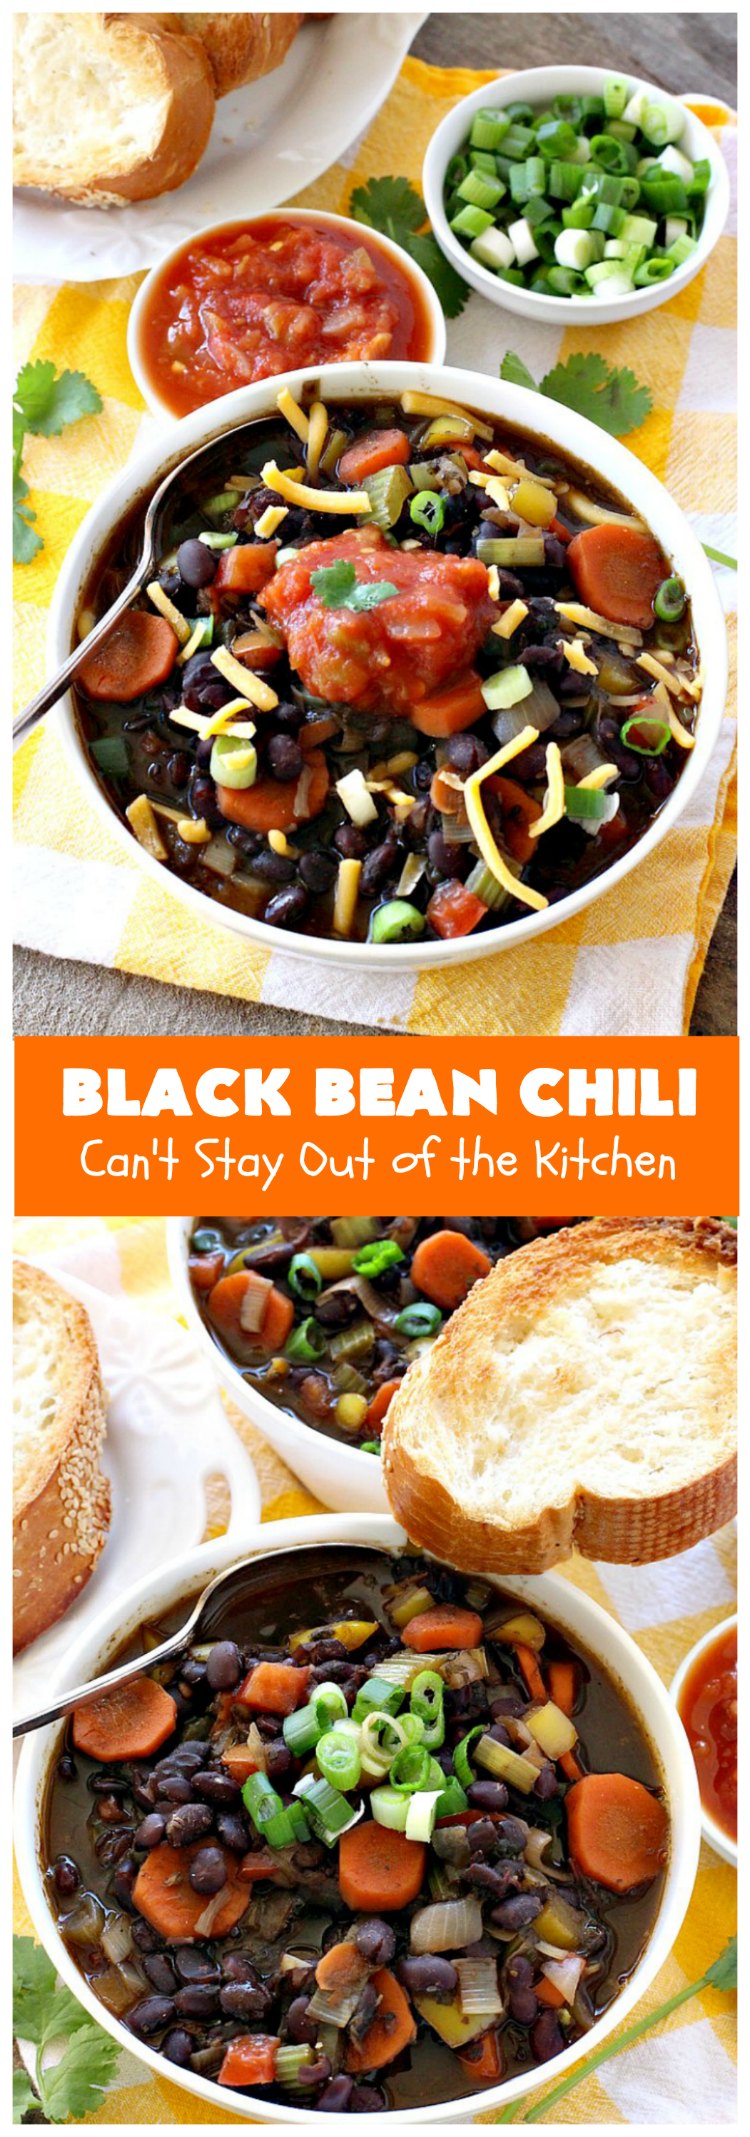 Black Bean Chili | Can't Stay Out of the Kitchen | fabulous #BlackBean #chili #recipe that's perfect for cold, winter days. It's healthy, #vegan, #GlutenFree & #CleanEating. #TexMex #soup #MeatlessMondays #BlackBeanChili